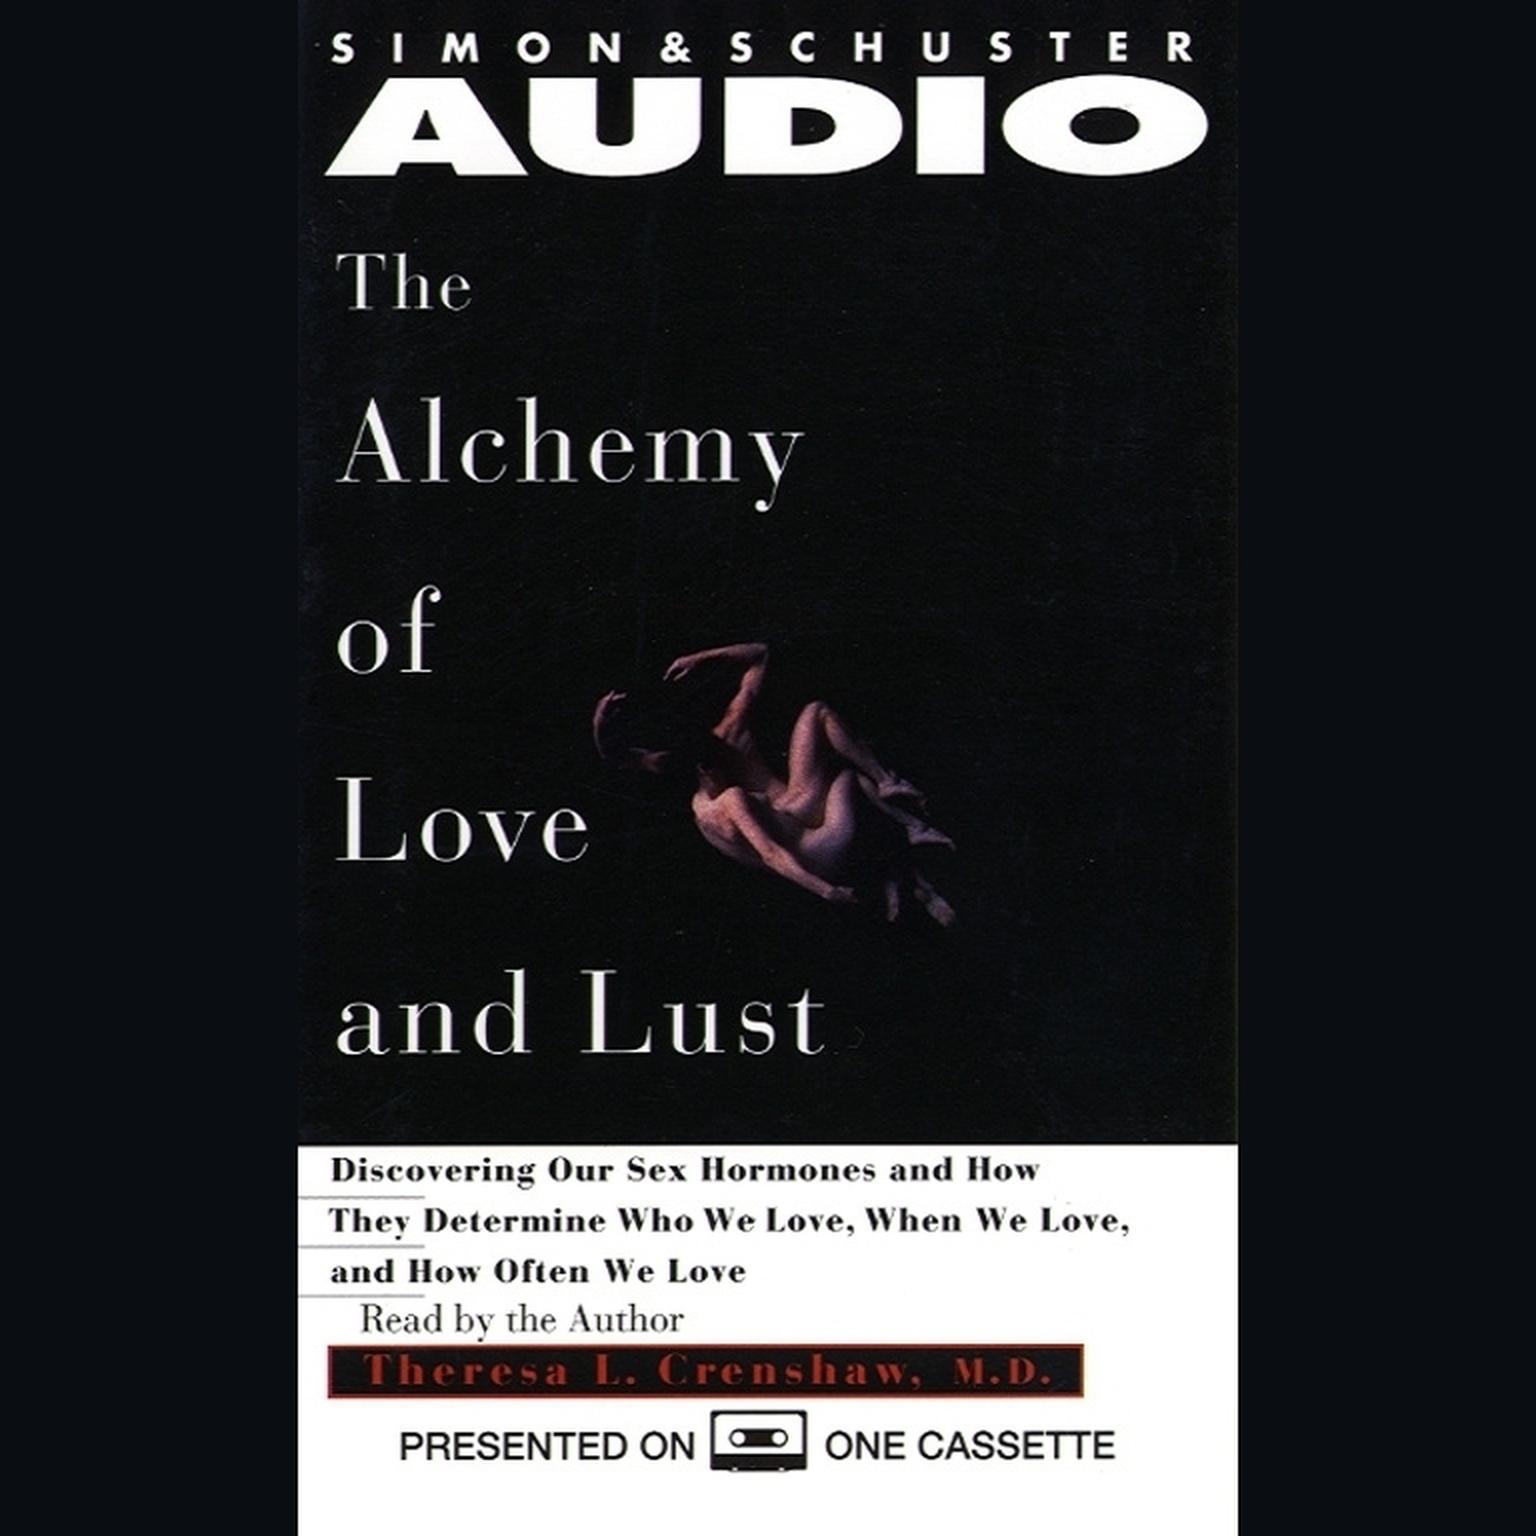 Alchemy of Love and Lust (Abridged): Discover Our Sex Hormones & Determine Who We Love Audiobook, by Theresa L. Crenshaw